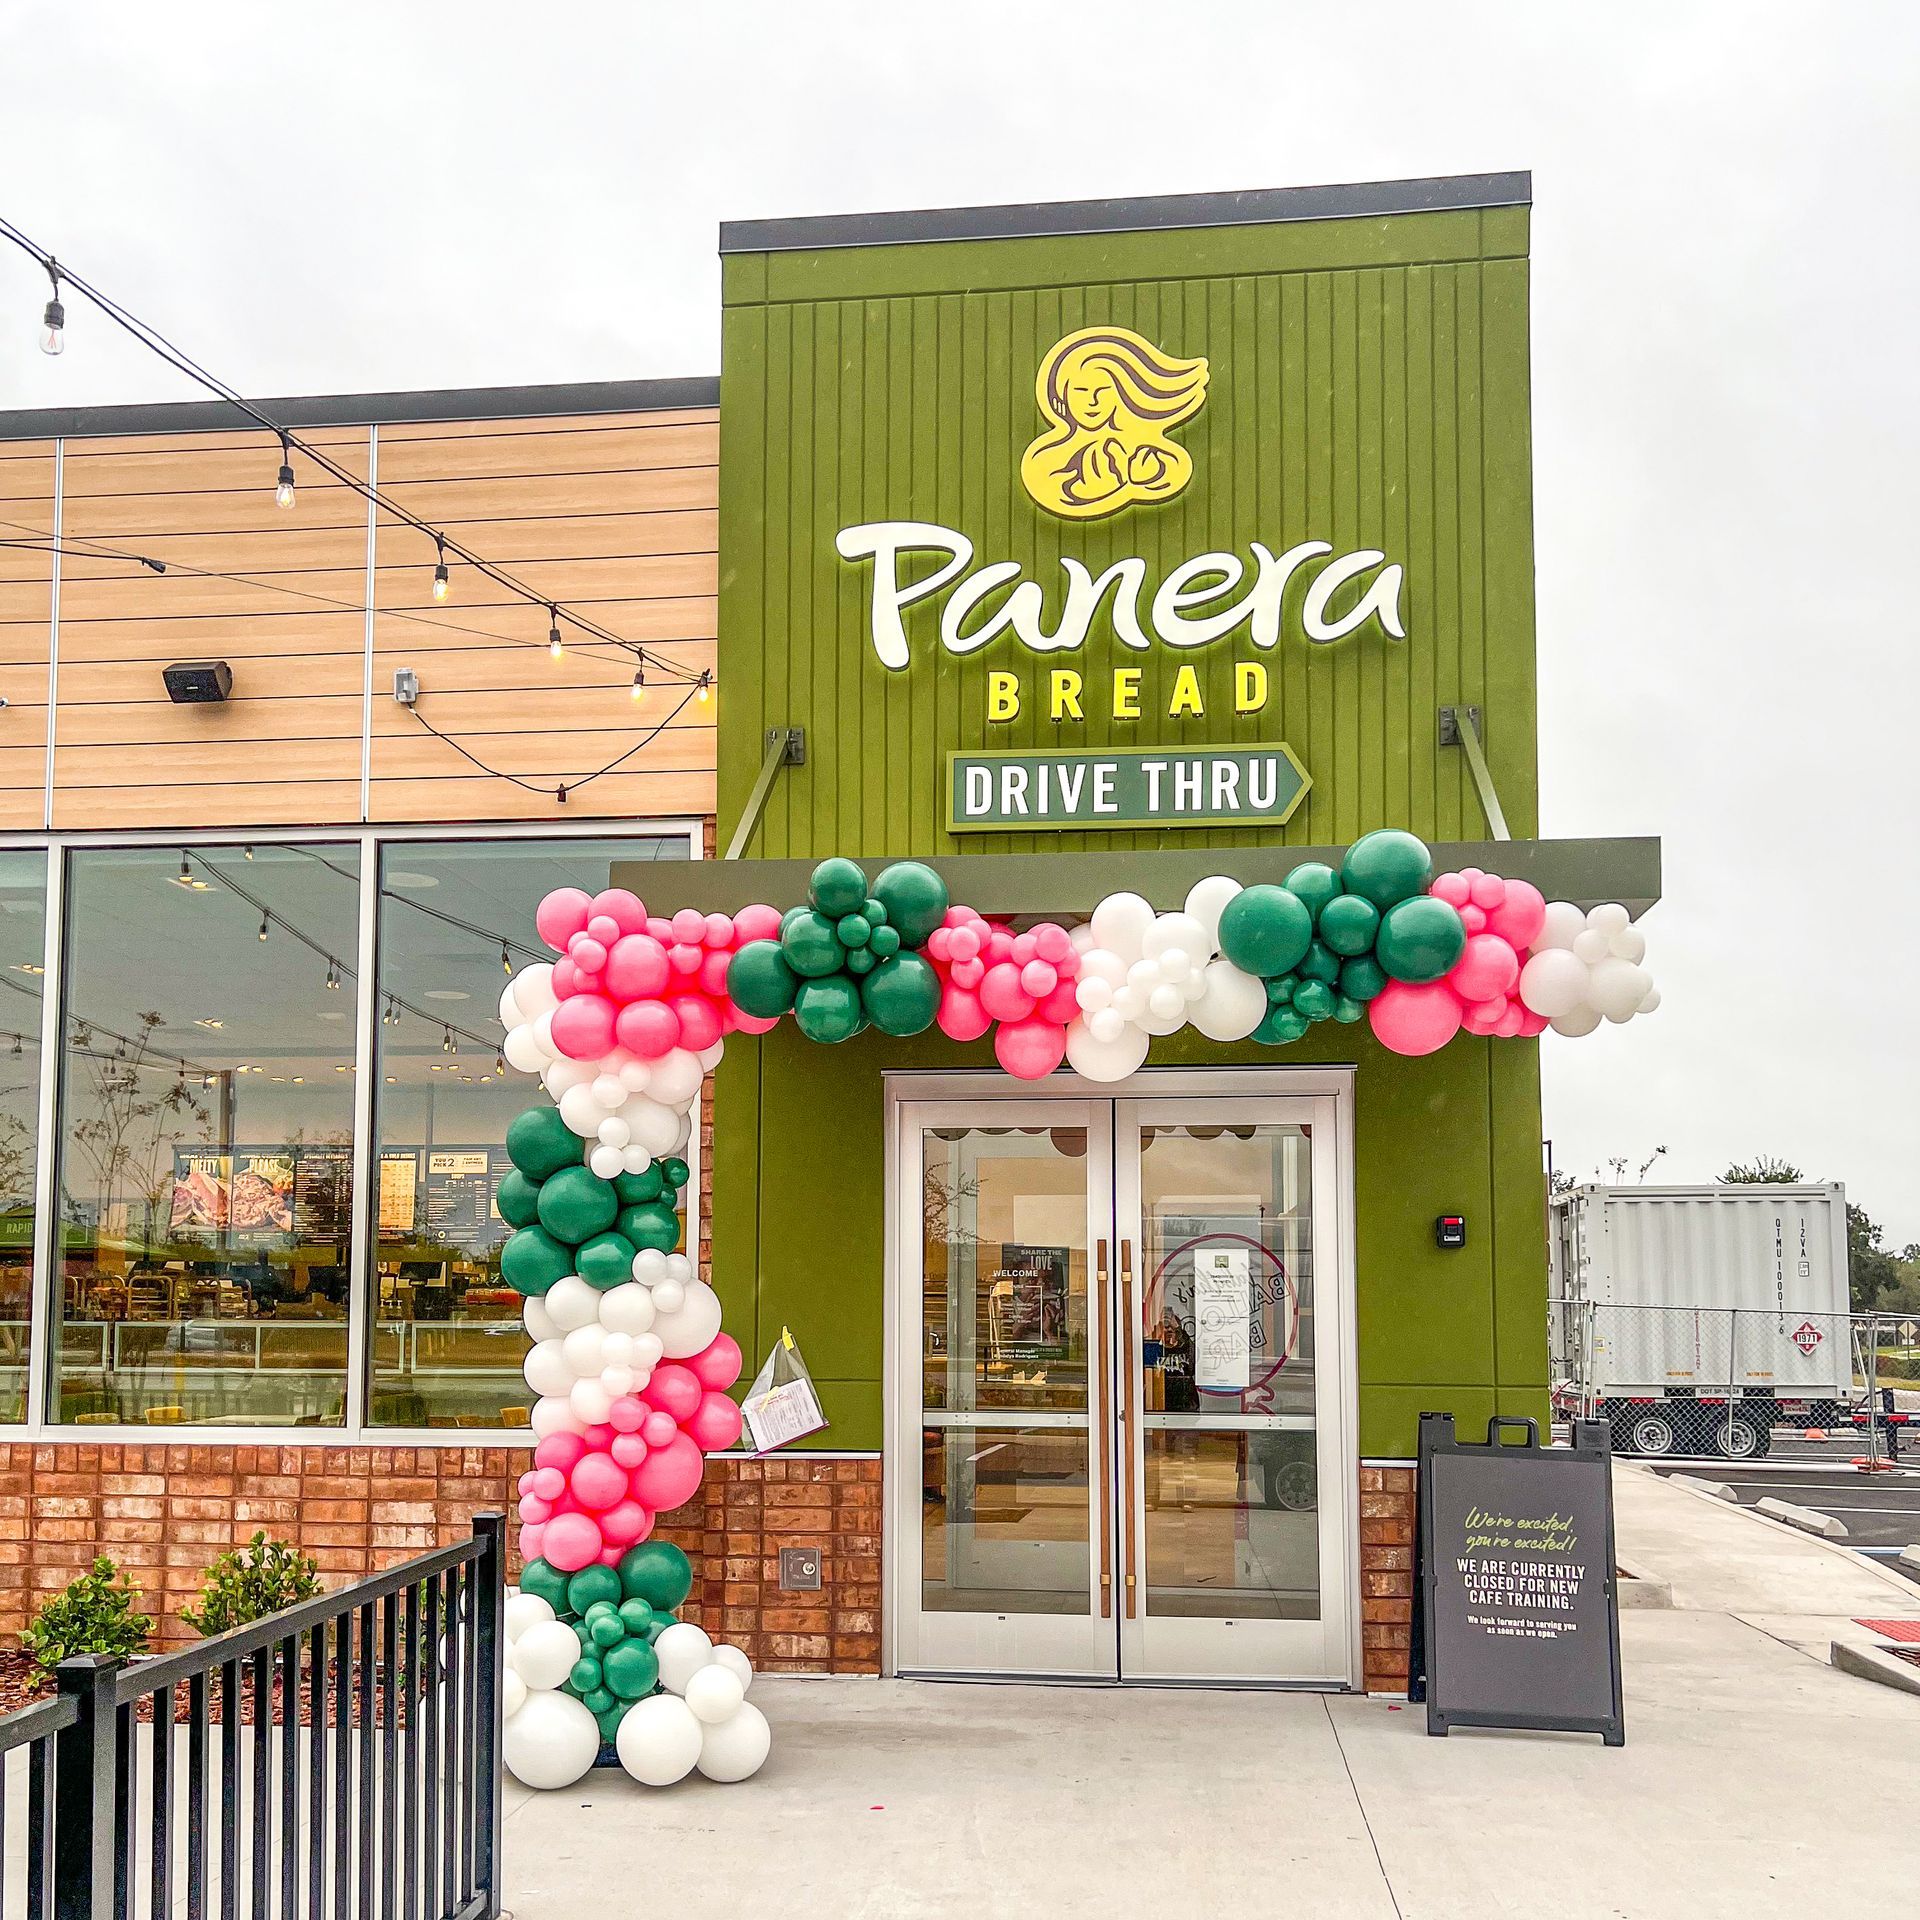 A panera bread drive thru is decorated with balloons